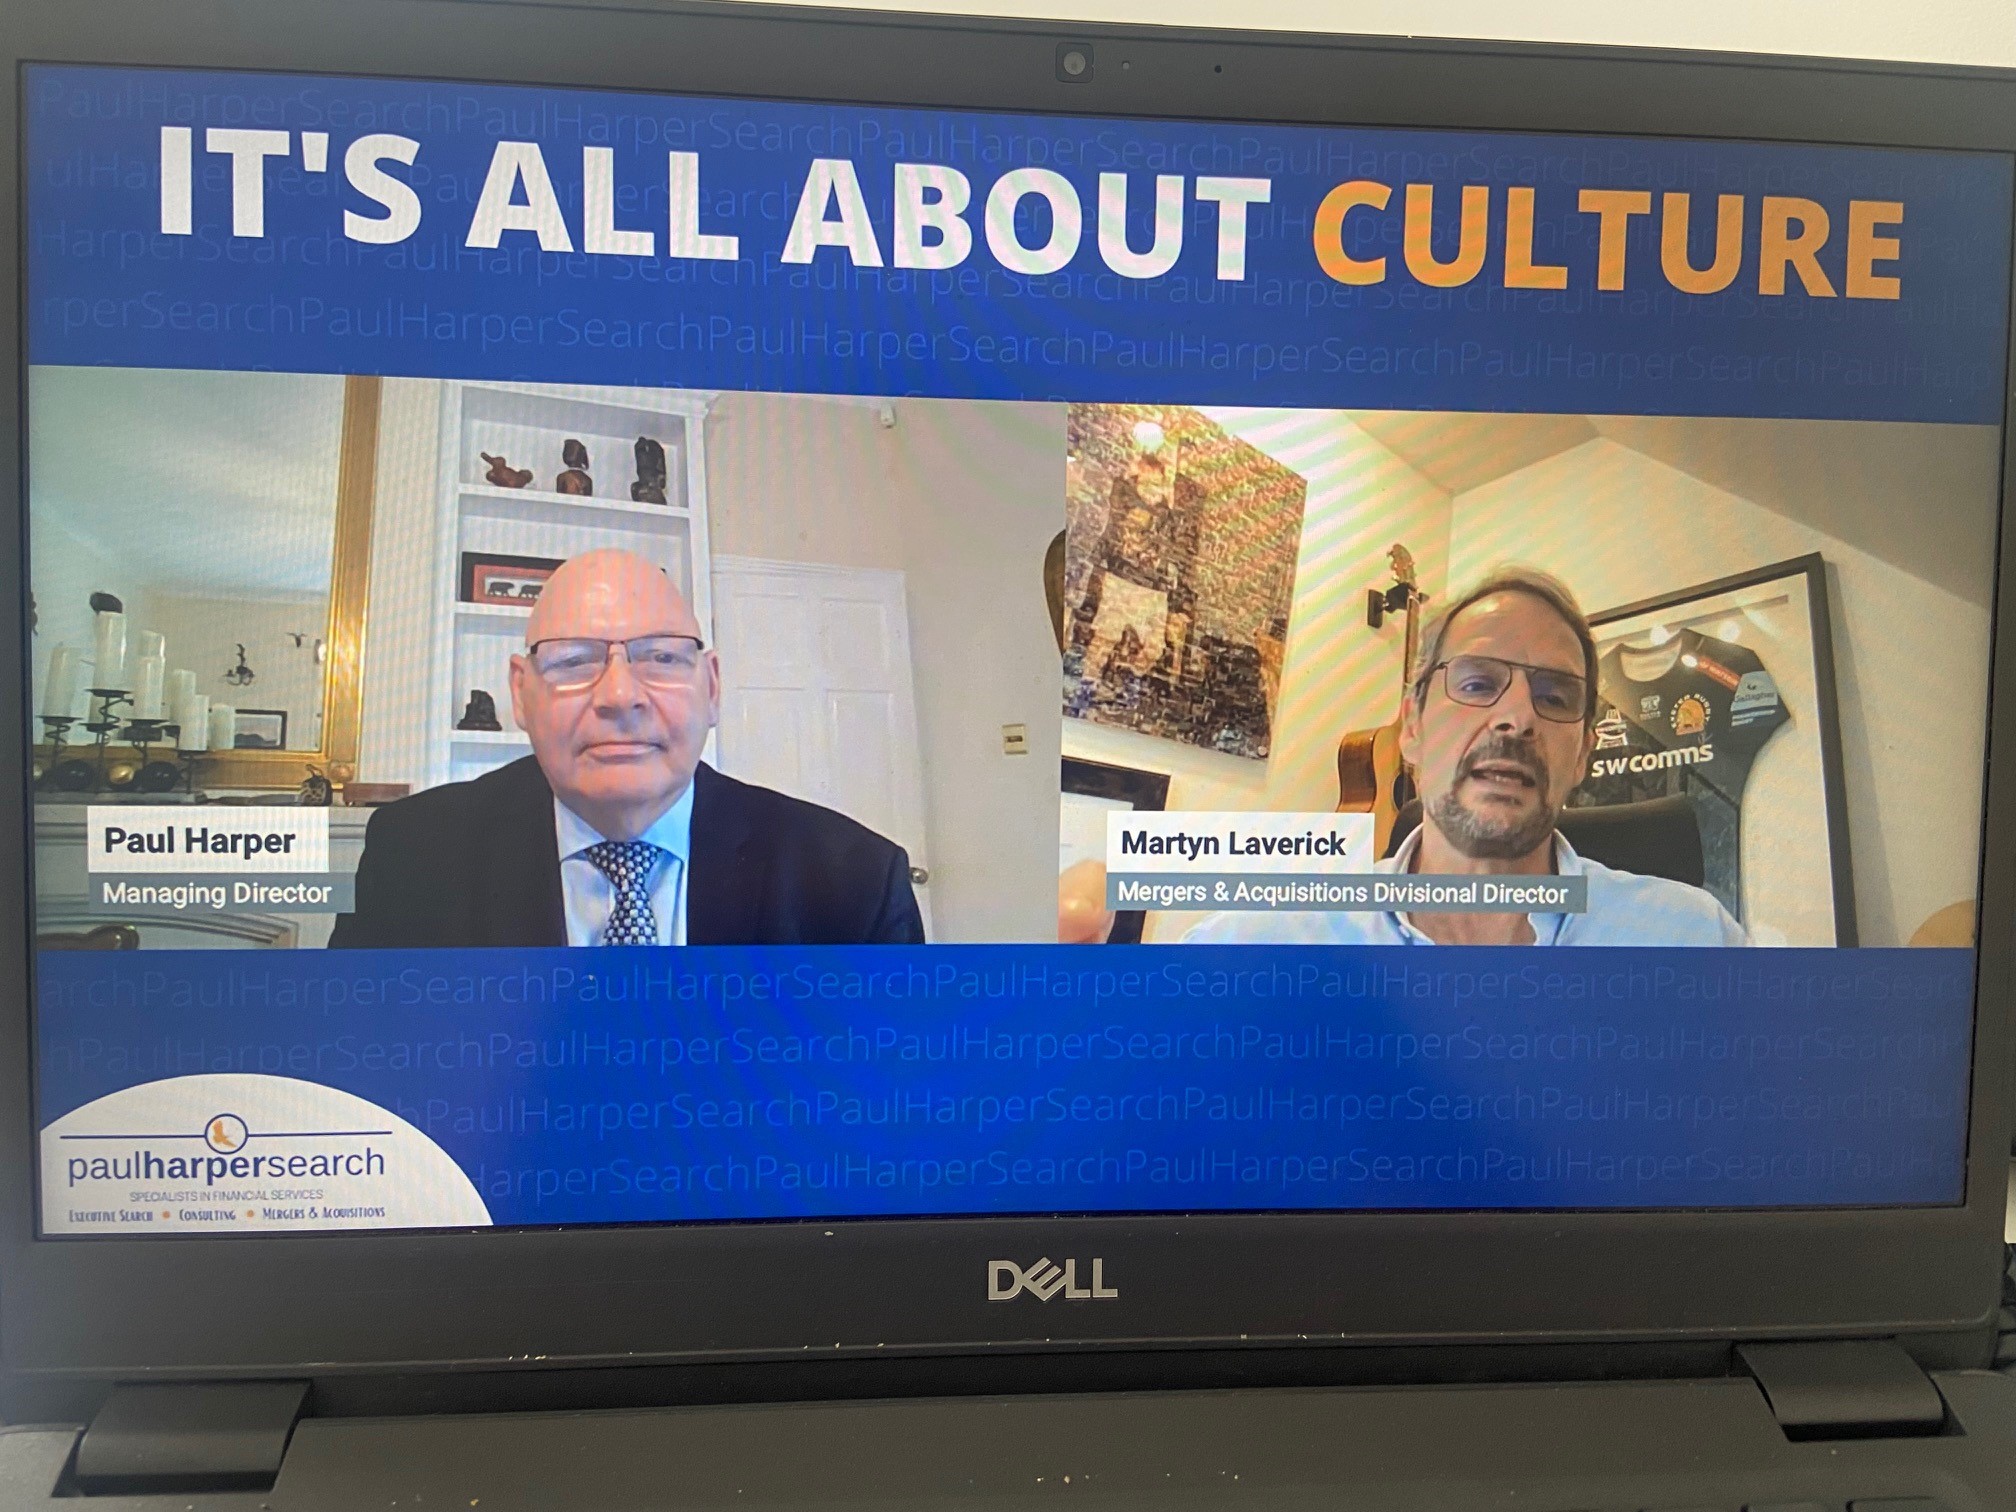 LinkedIn Live - It's all about CULTURE